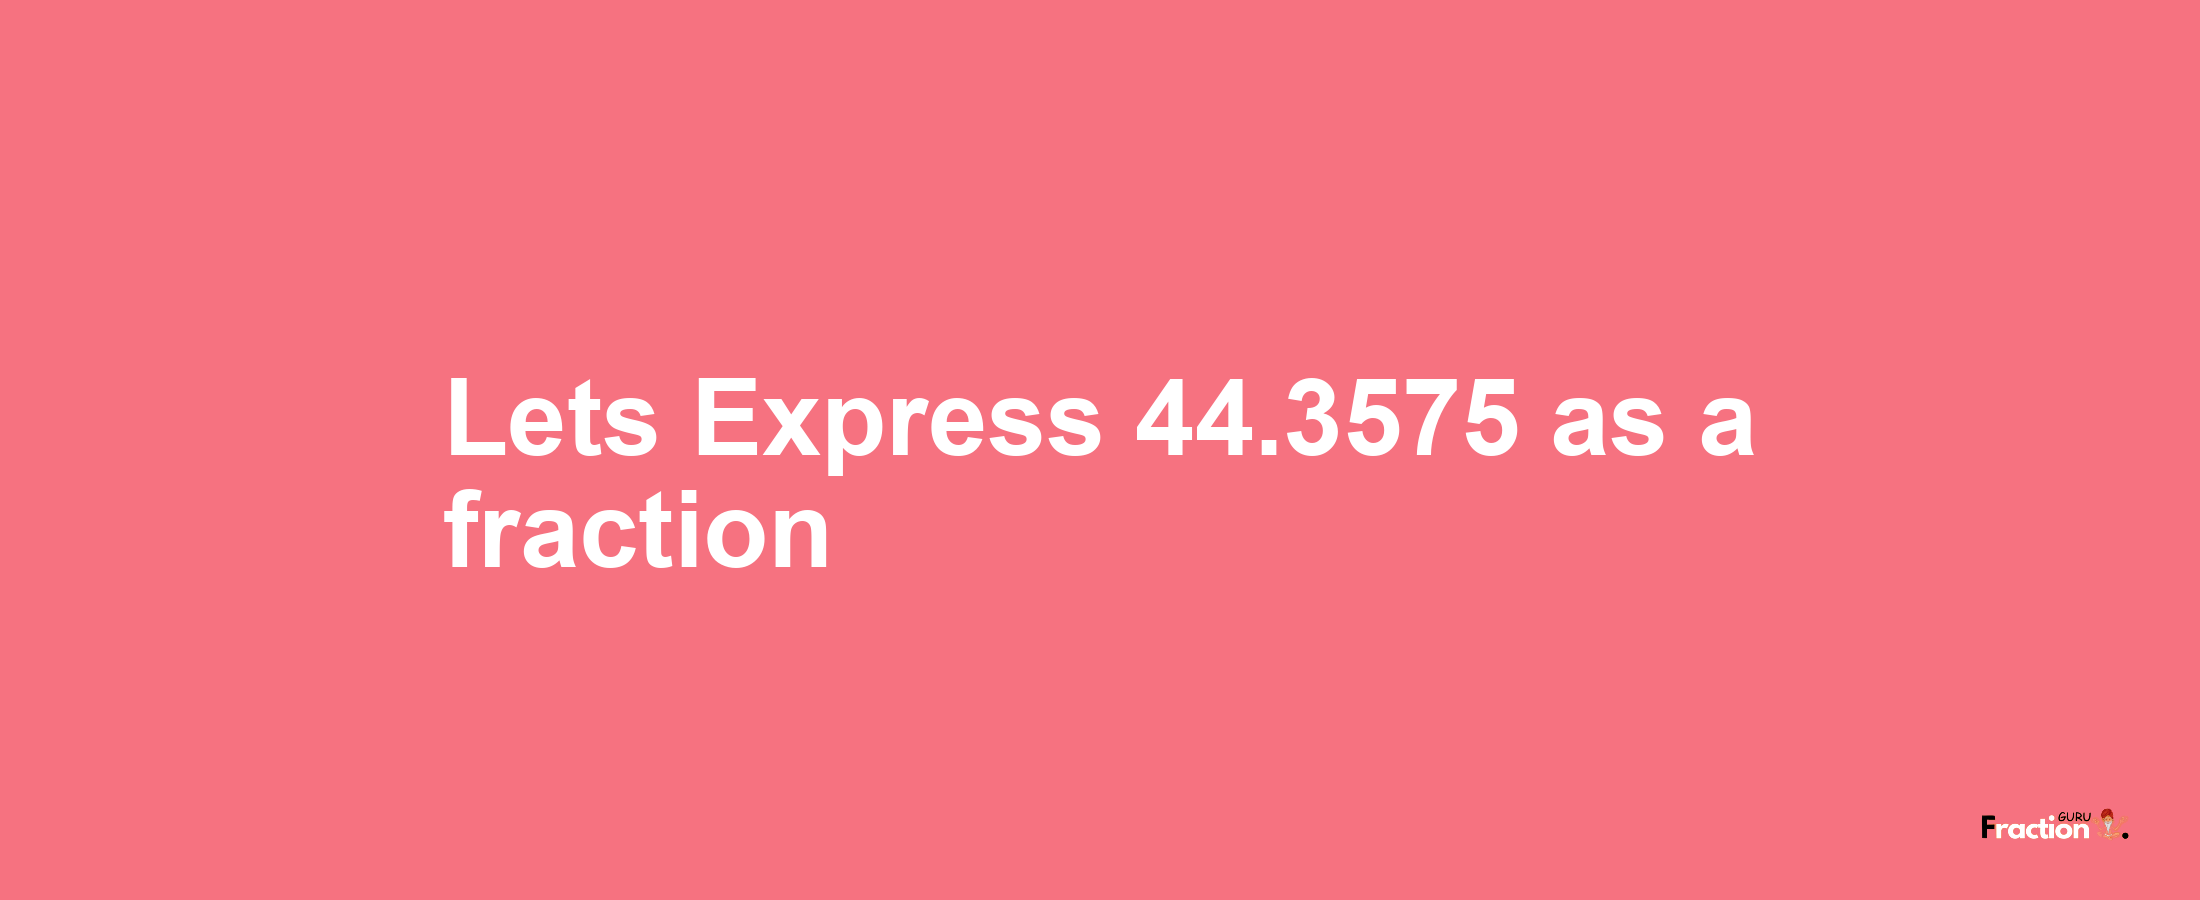 Lets Express 44.3575 as afraction